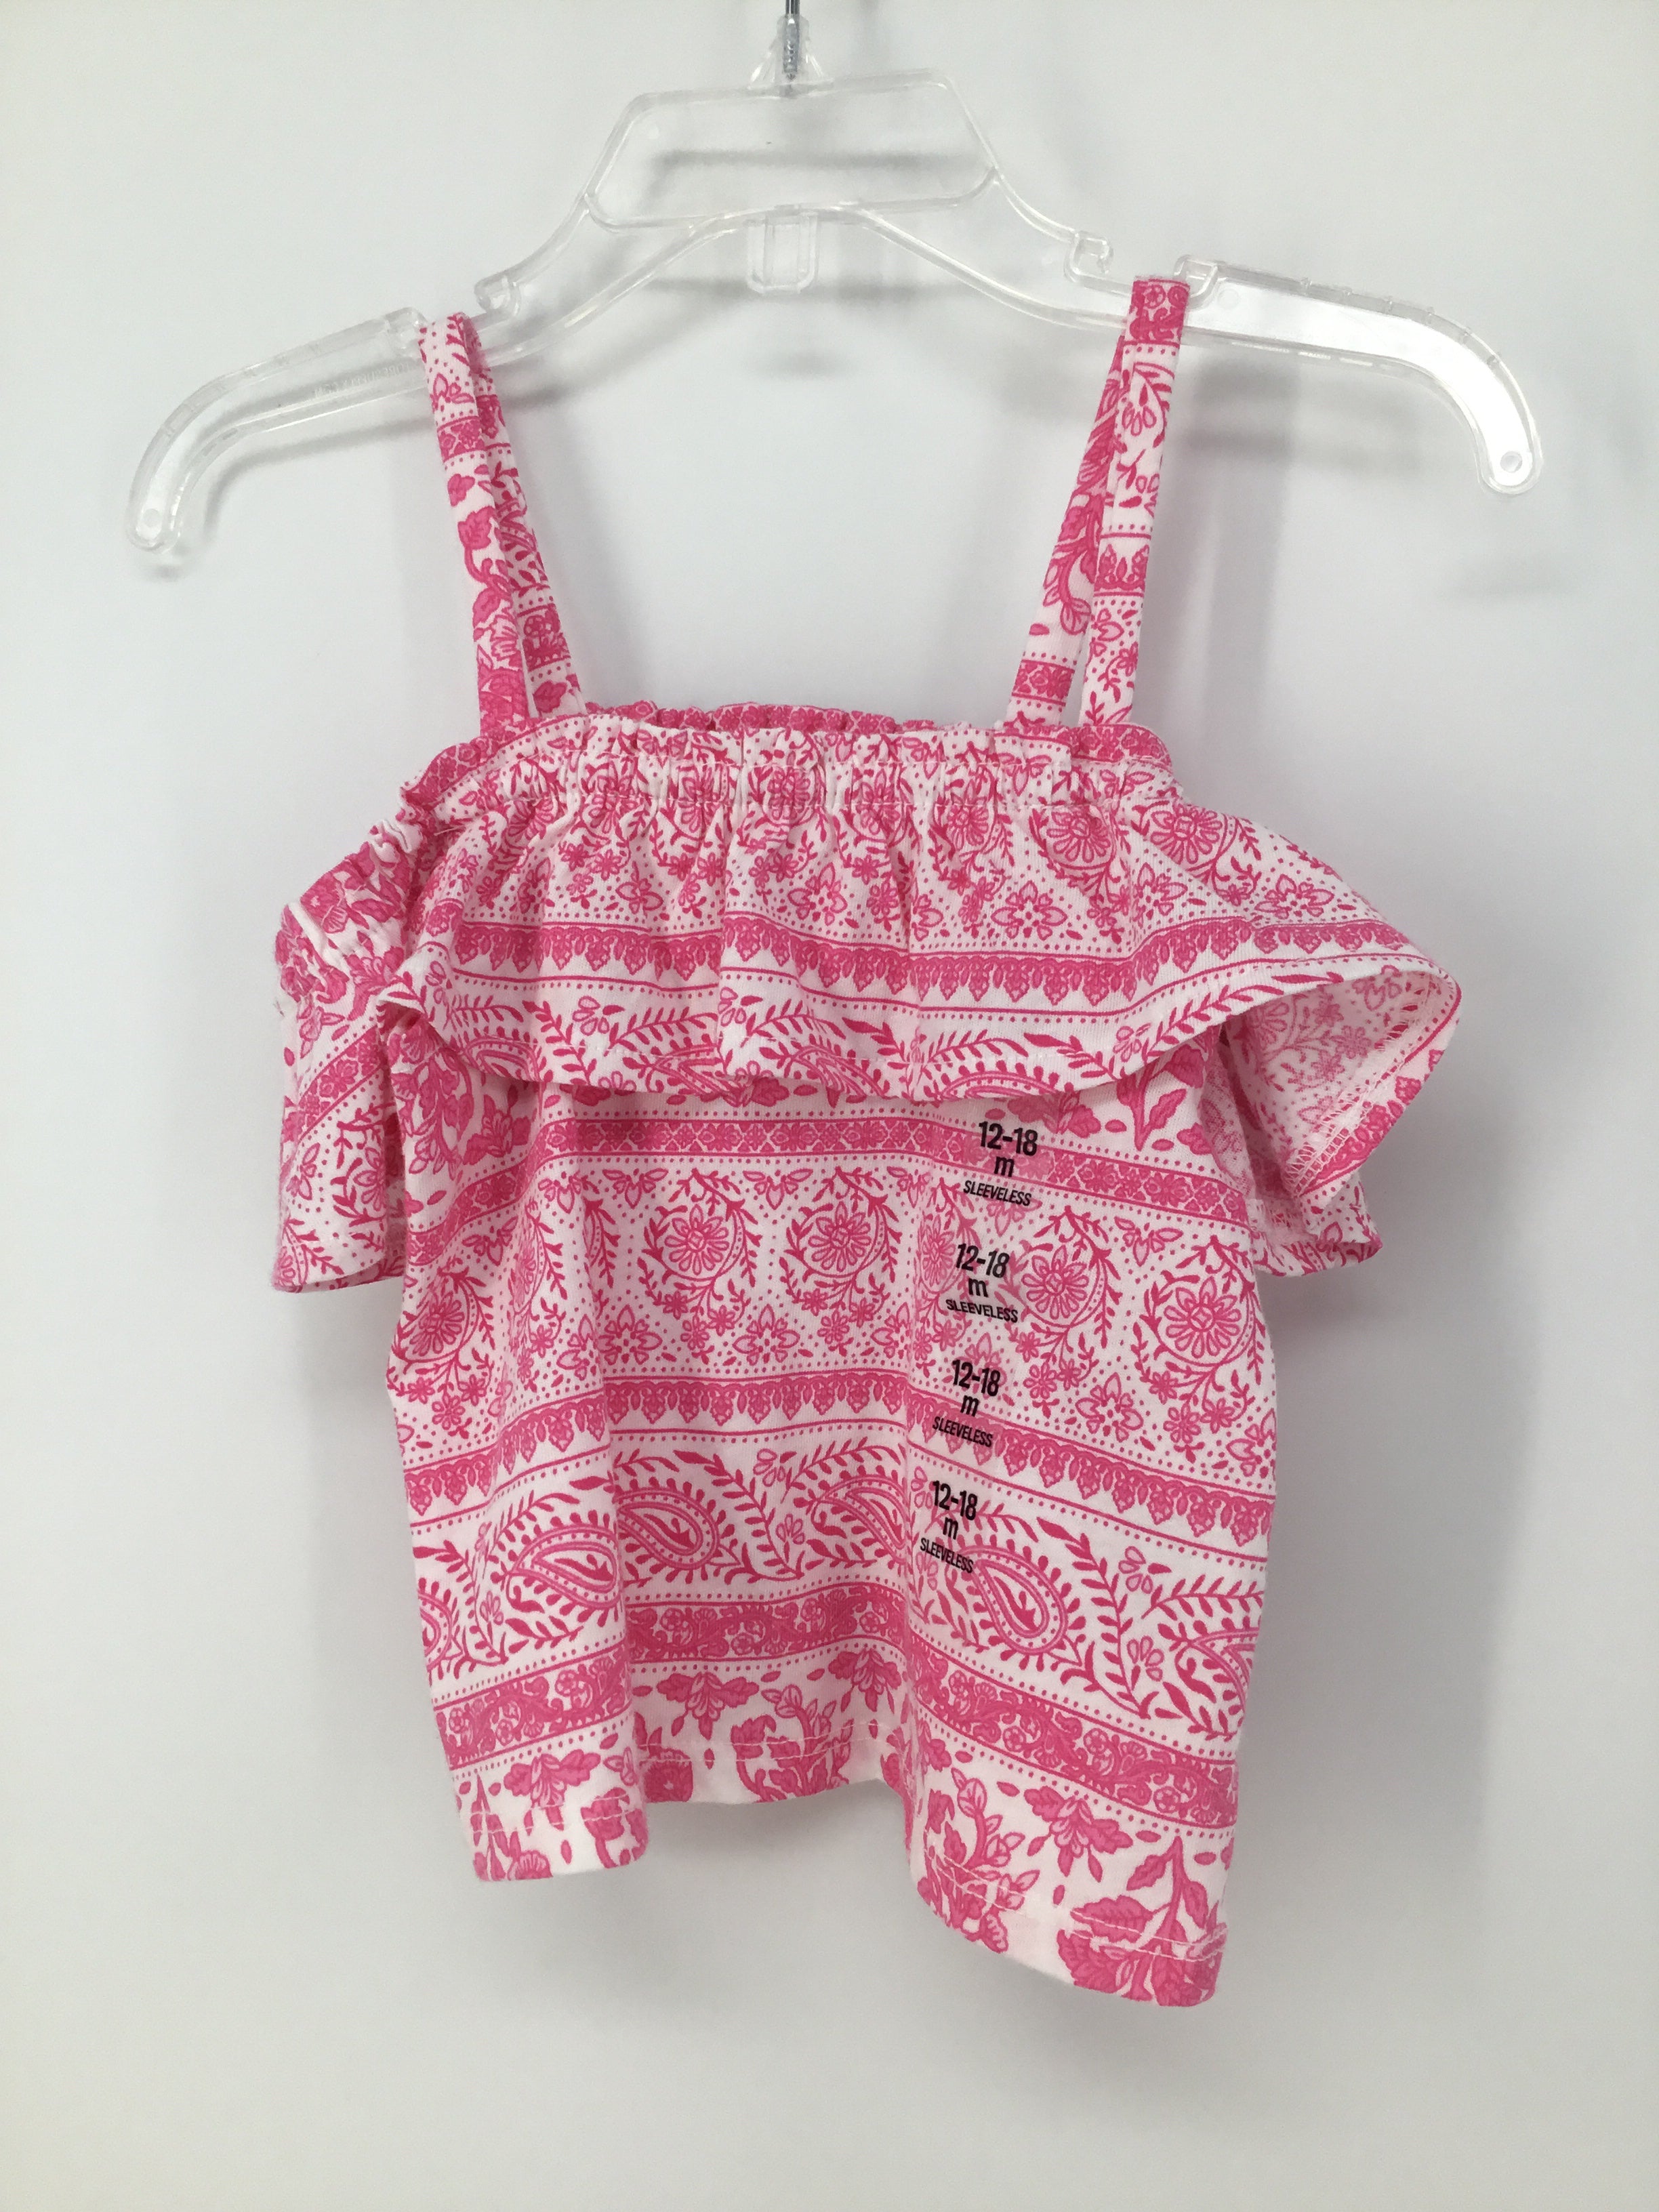 Childrens Place Child Size 12-18 Months Pink Tank top - girls